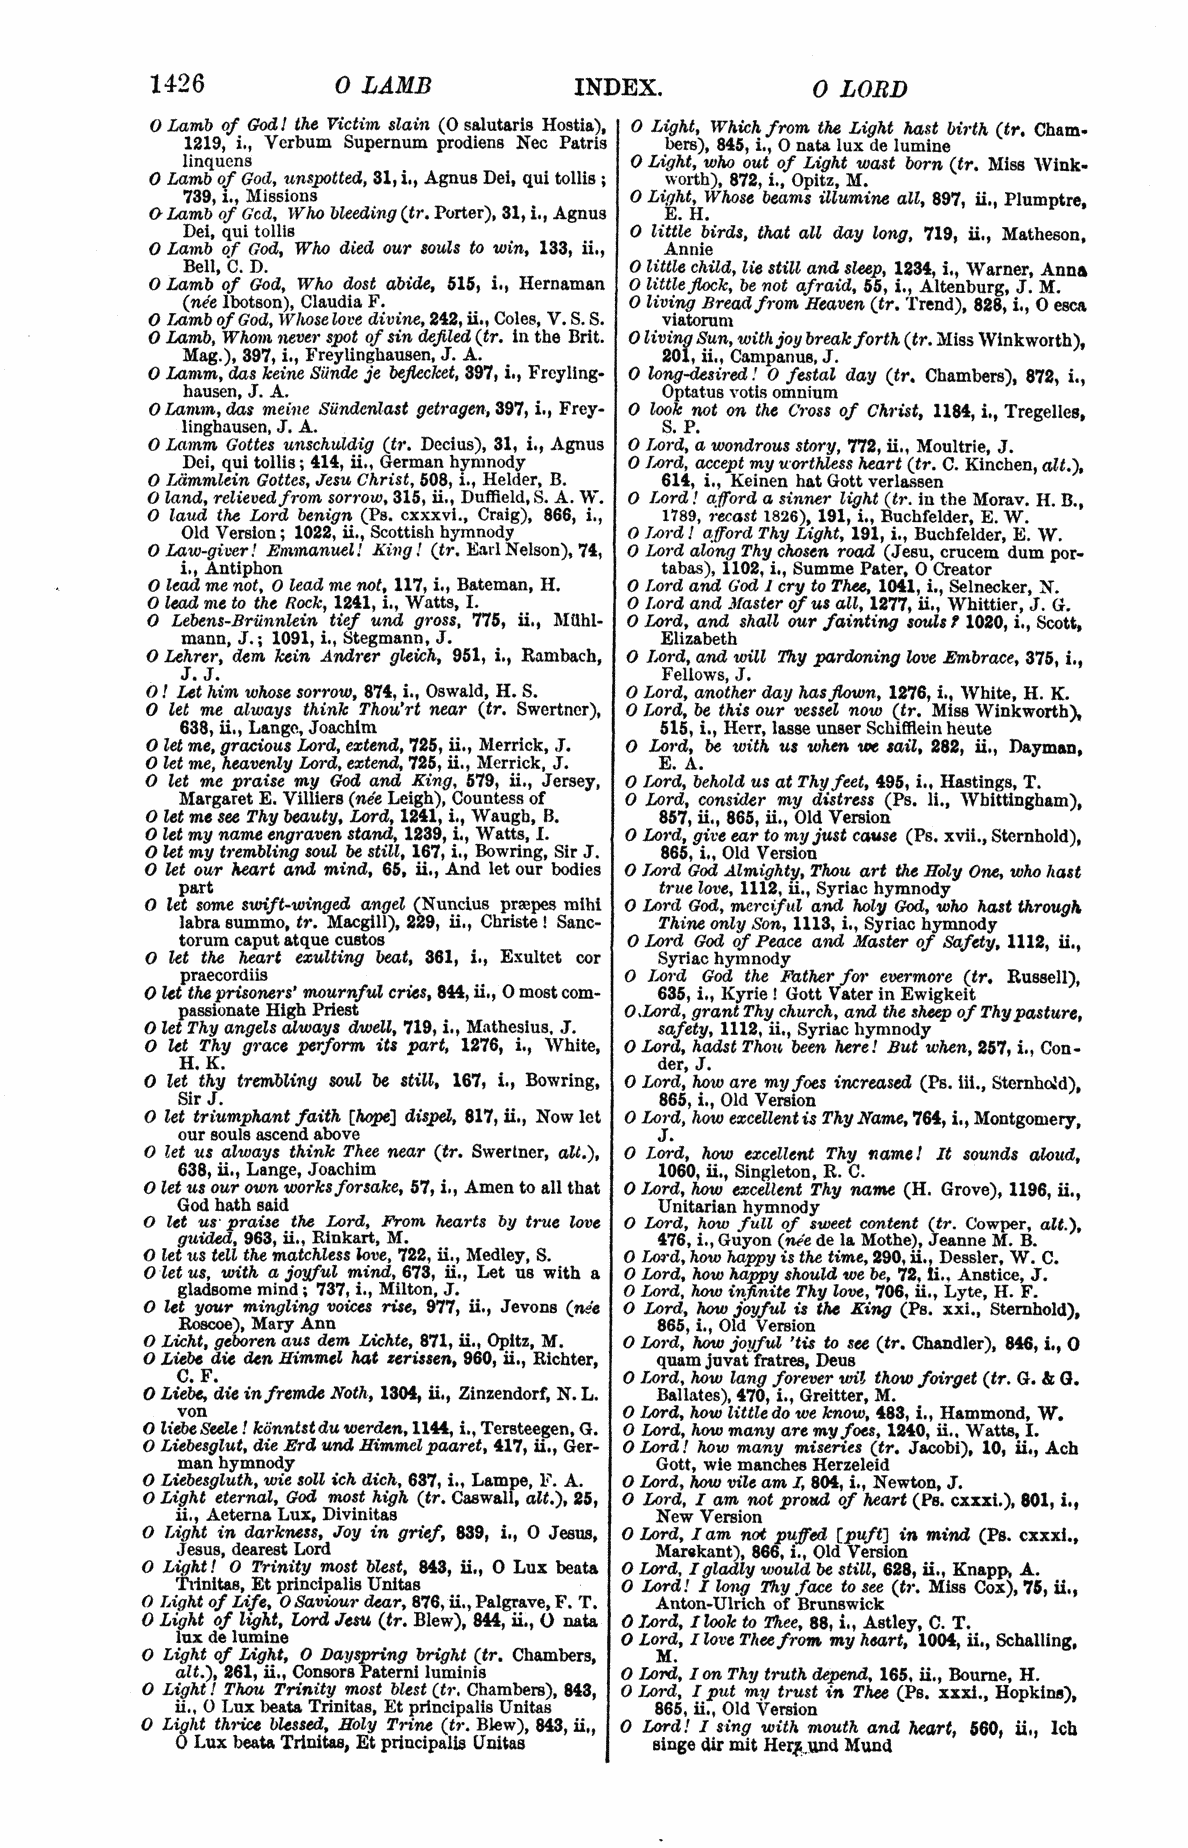 Image of page 1426